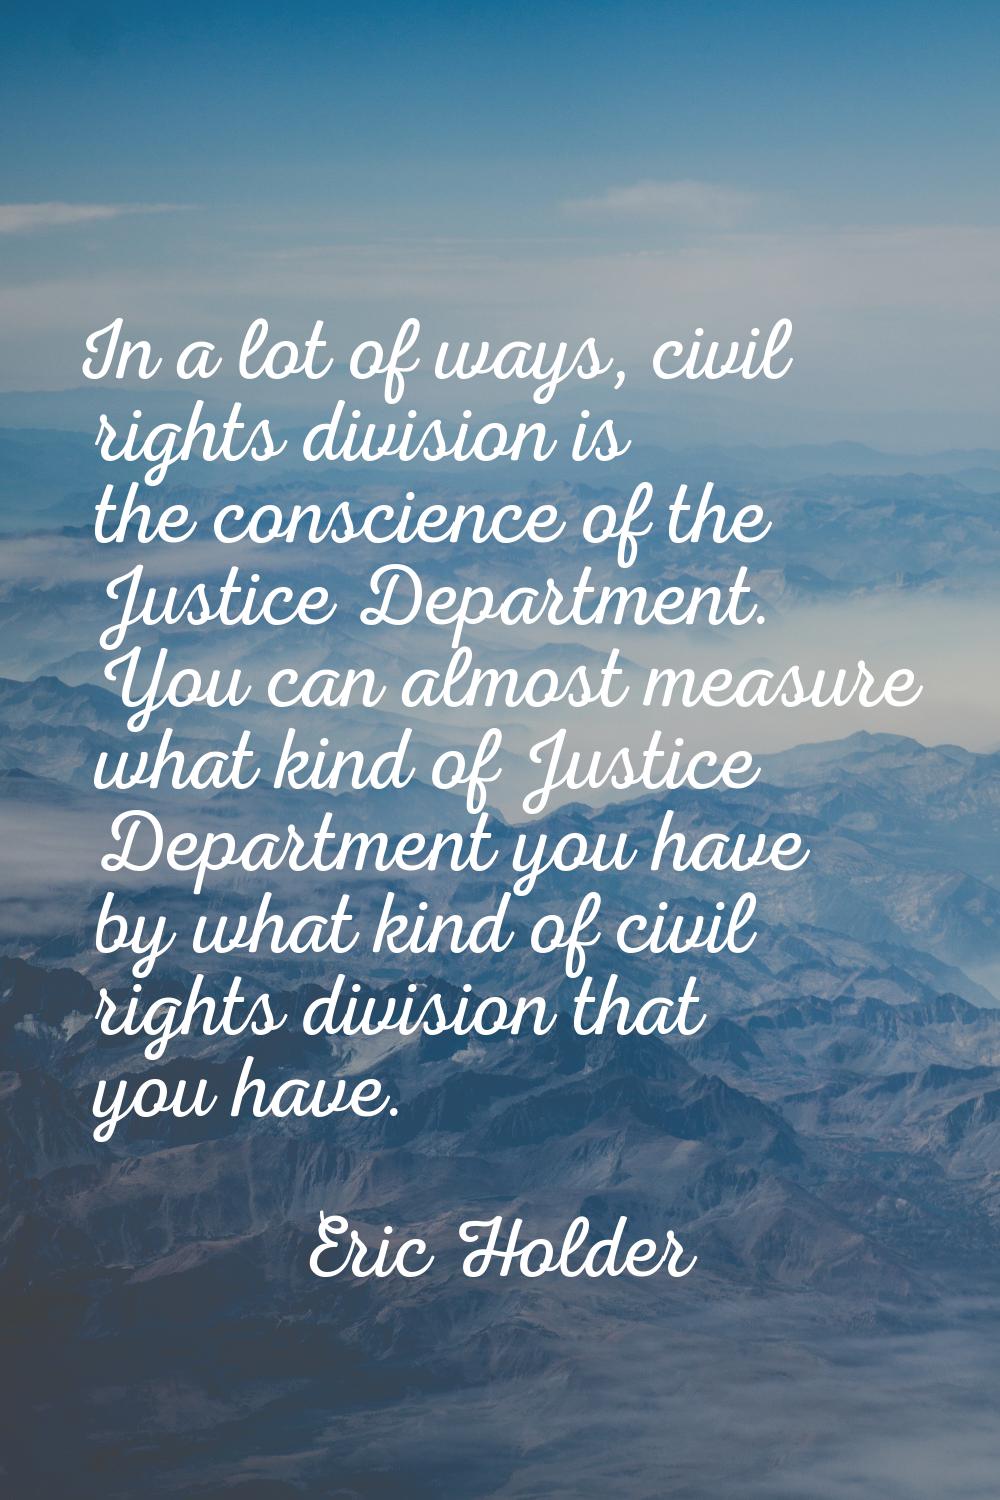 In a lot of ways, civil rights division is the conscience of the Justice Department. You can almost